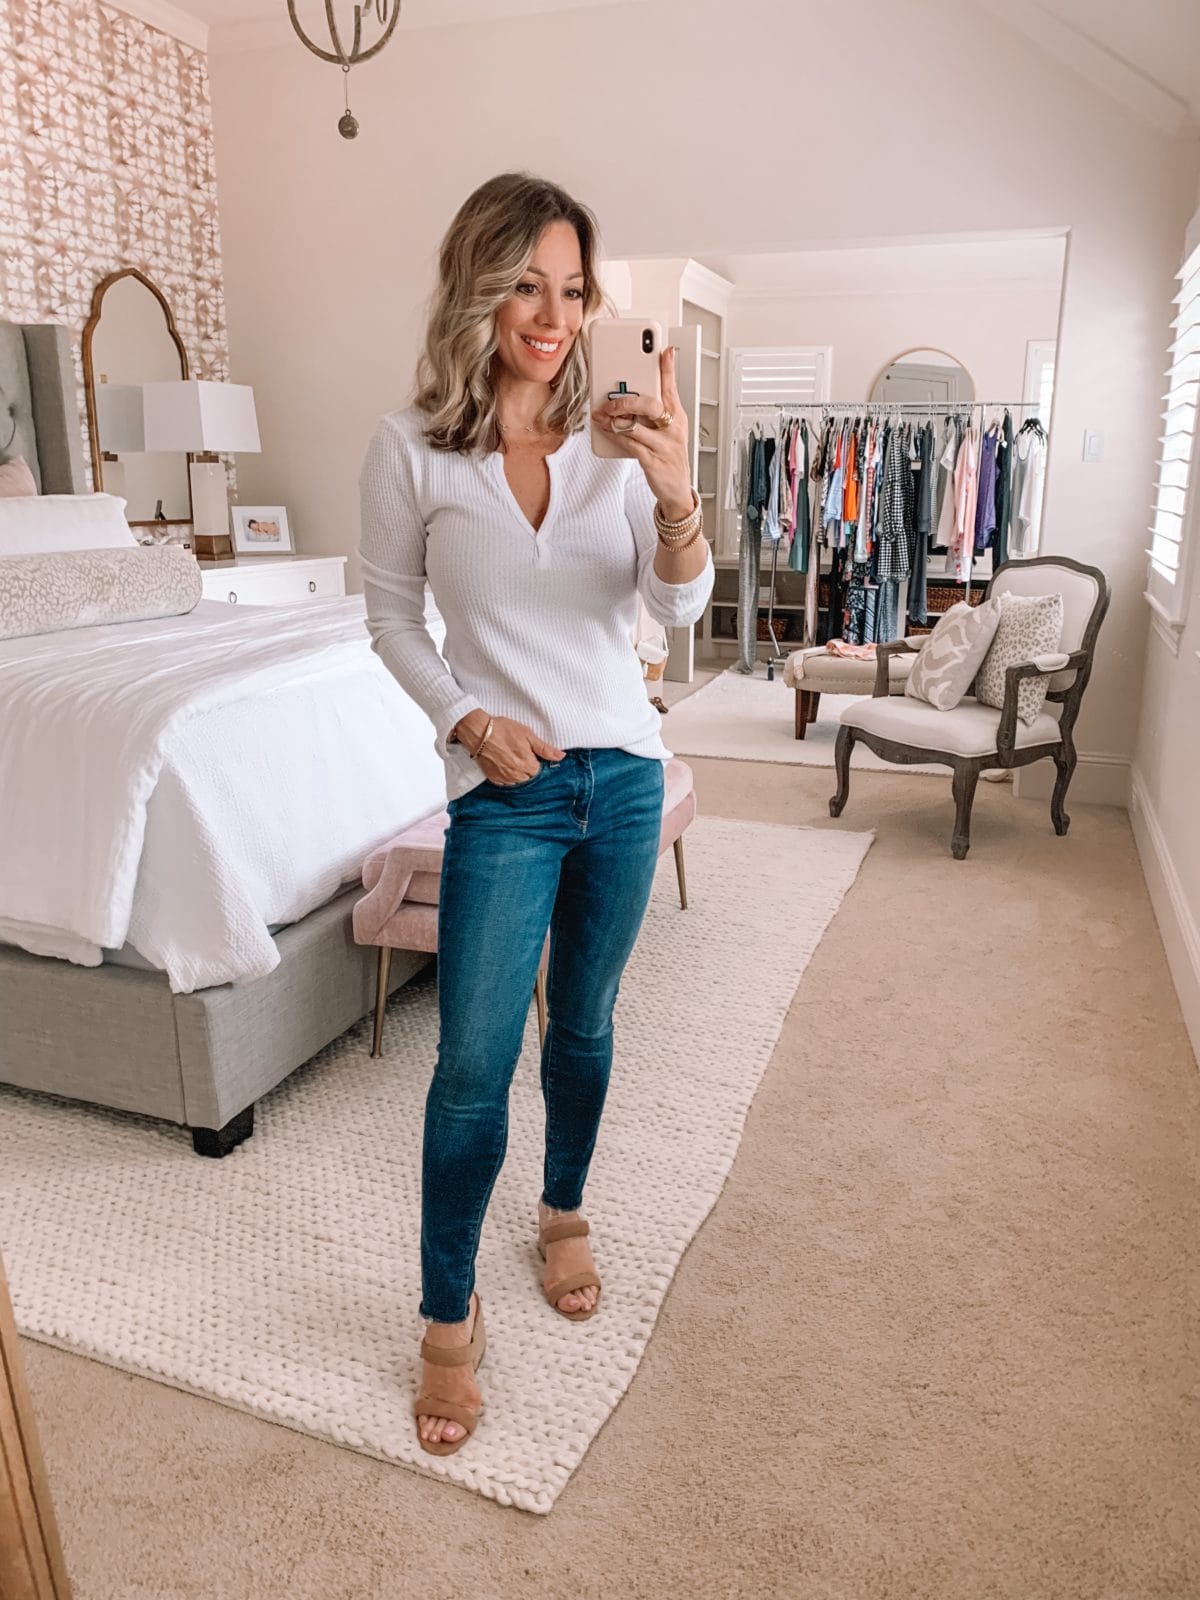 Amazon Fashion Finds, Waffle Knit Top, Skinny Jeans, Heels 